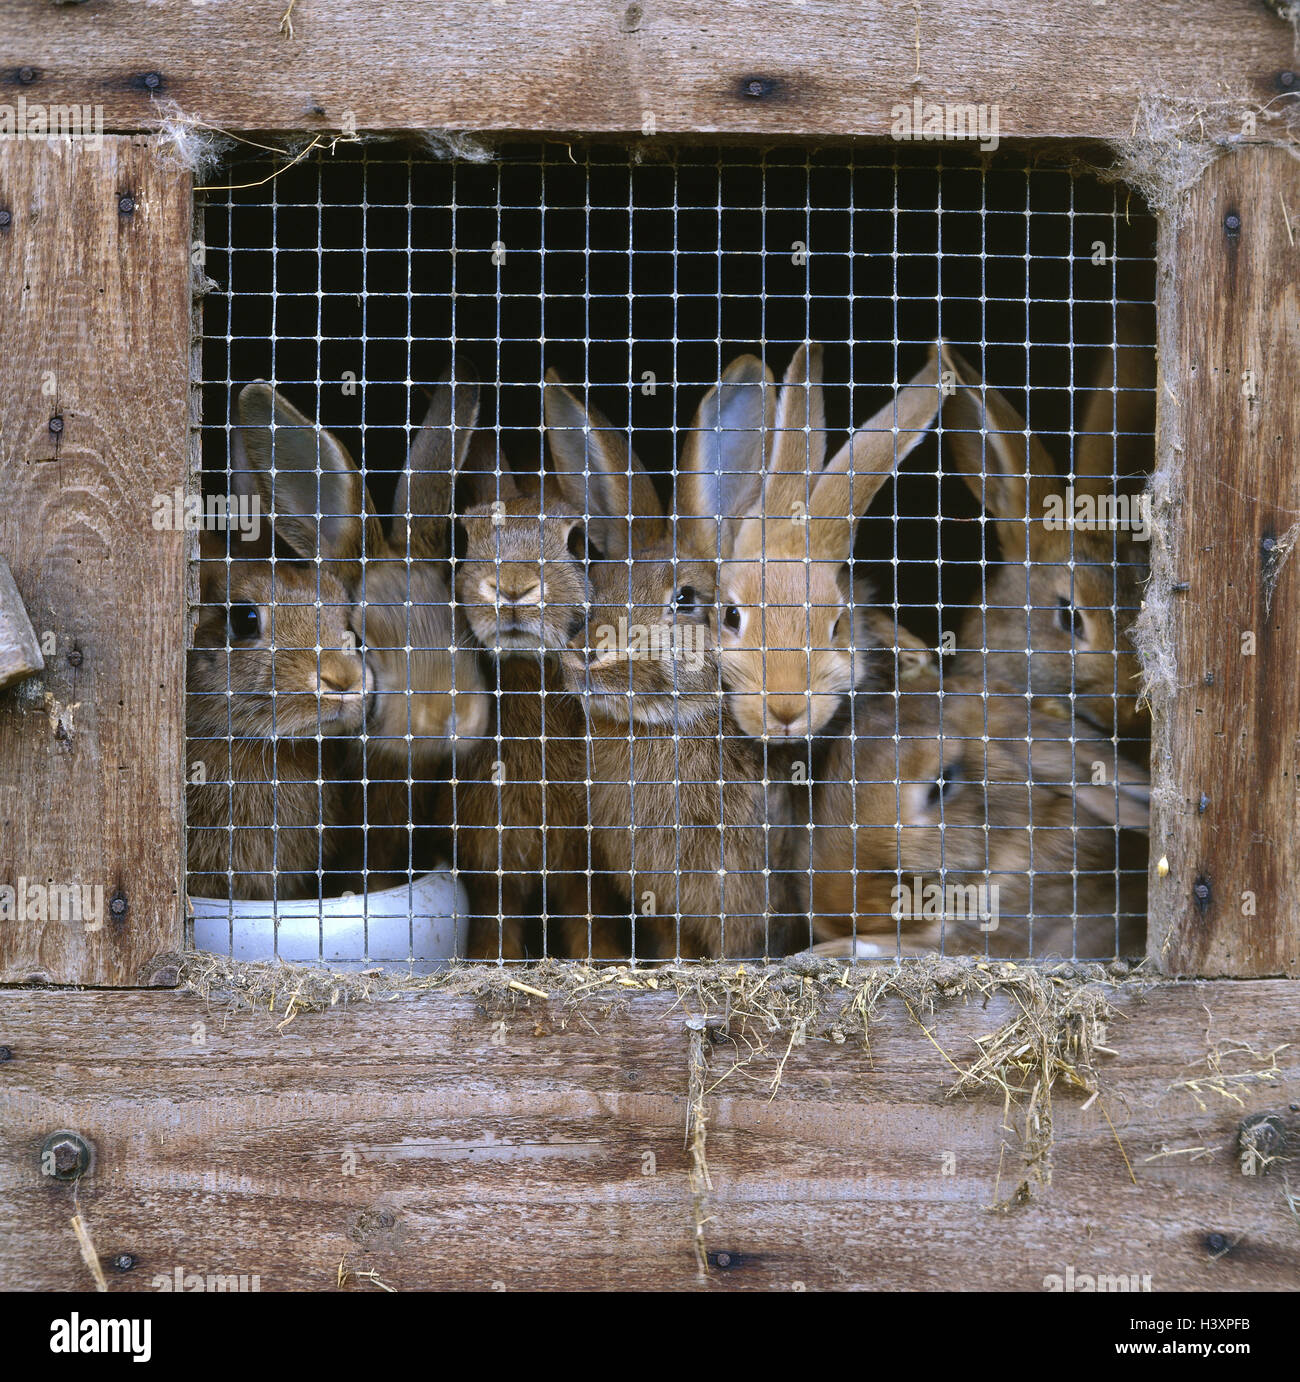 Wooden stable, stable hare, young, mammals, rodents, rodents, animals, hares, hare's animals, young animals, hare's stable, stable, card cage, locked up, wire netting, wire, grid, keeping of pets, breeding, hare's breeding Stock Photo